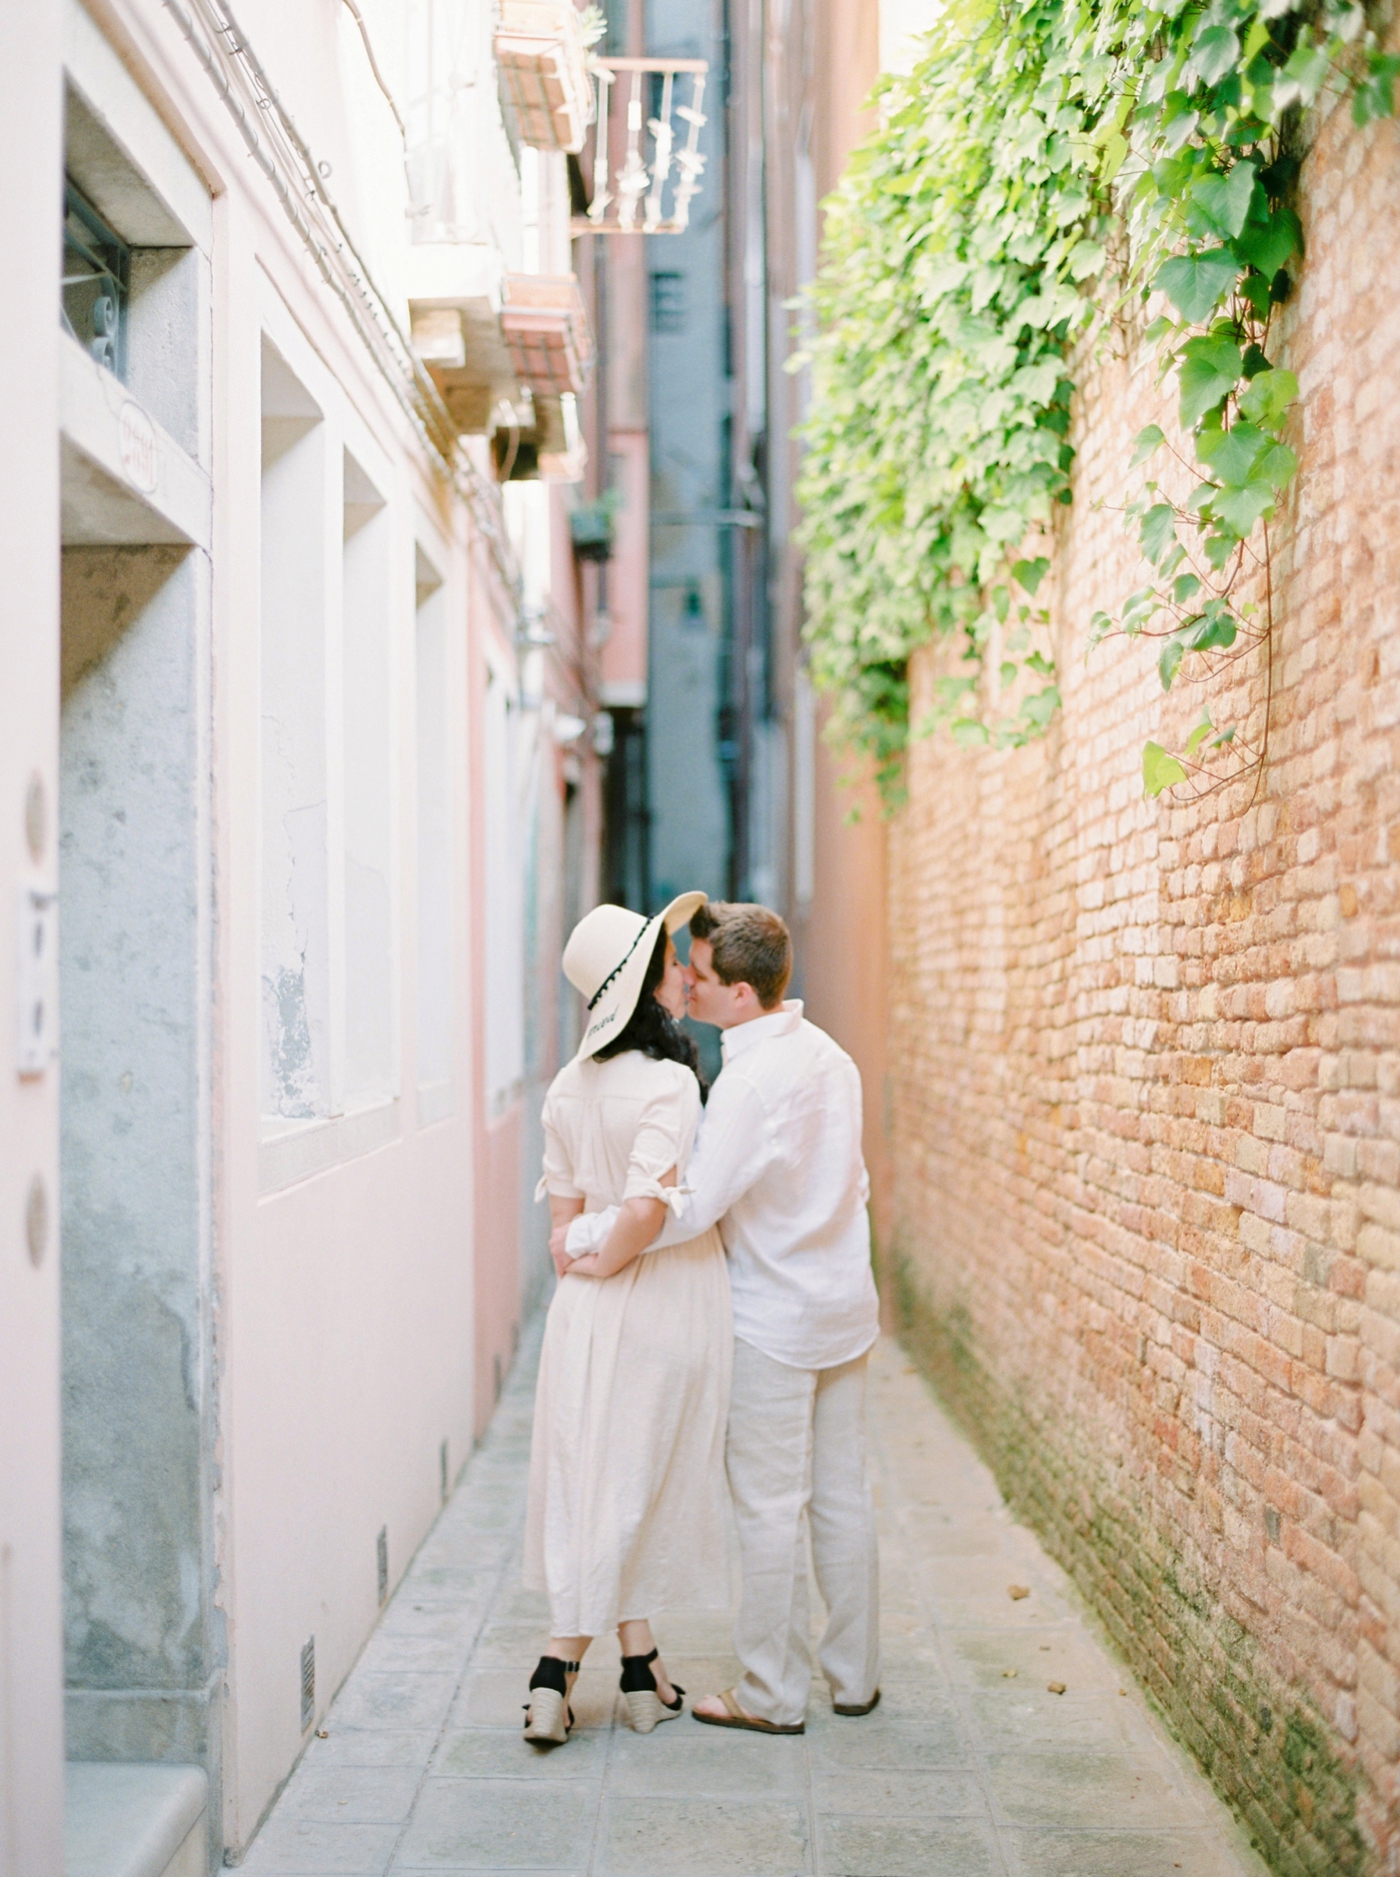 Venice italy wedding photographers | couples honeymoon session | exploring venice canals with film photographer justine milton